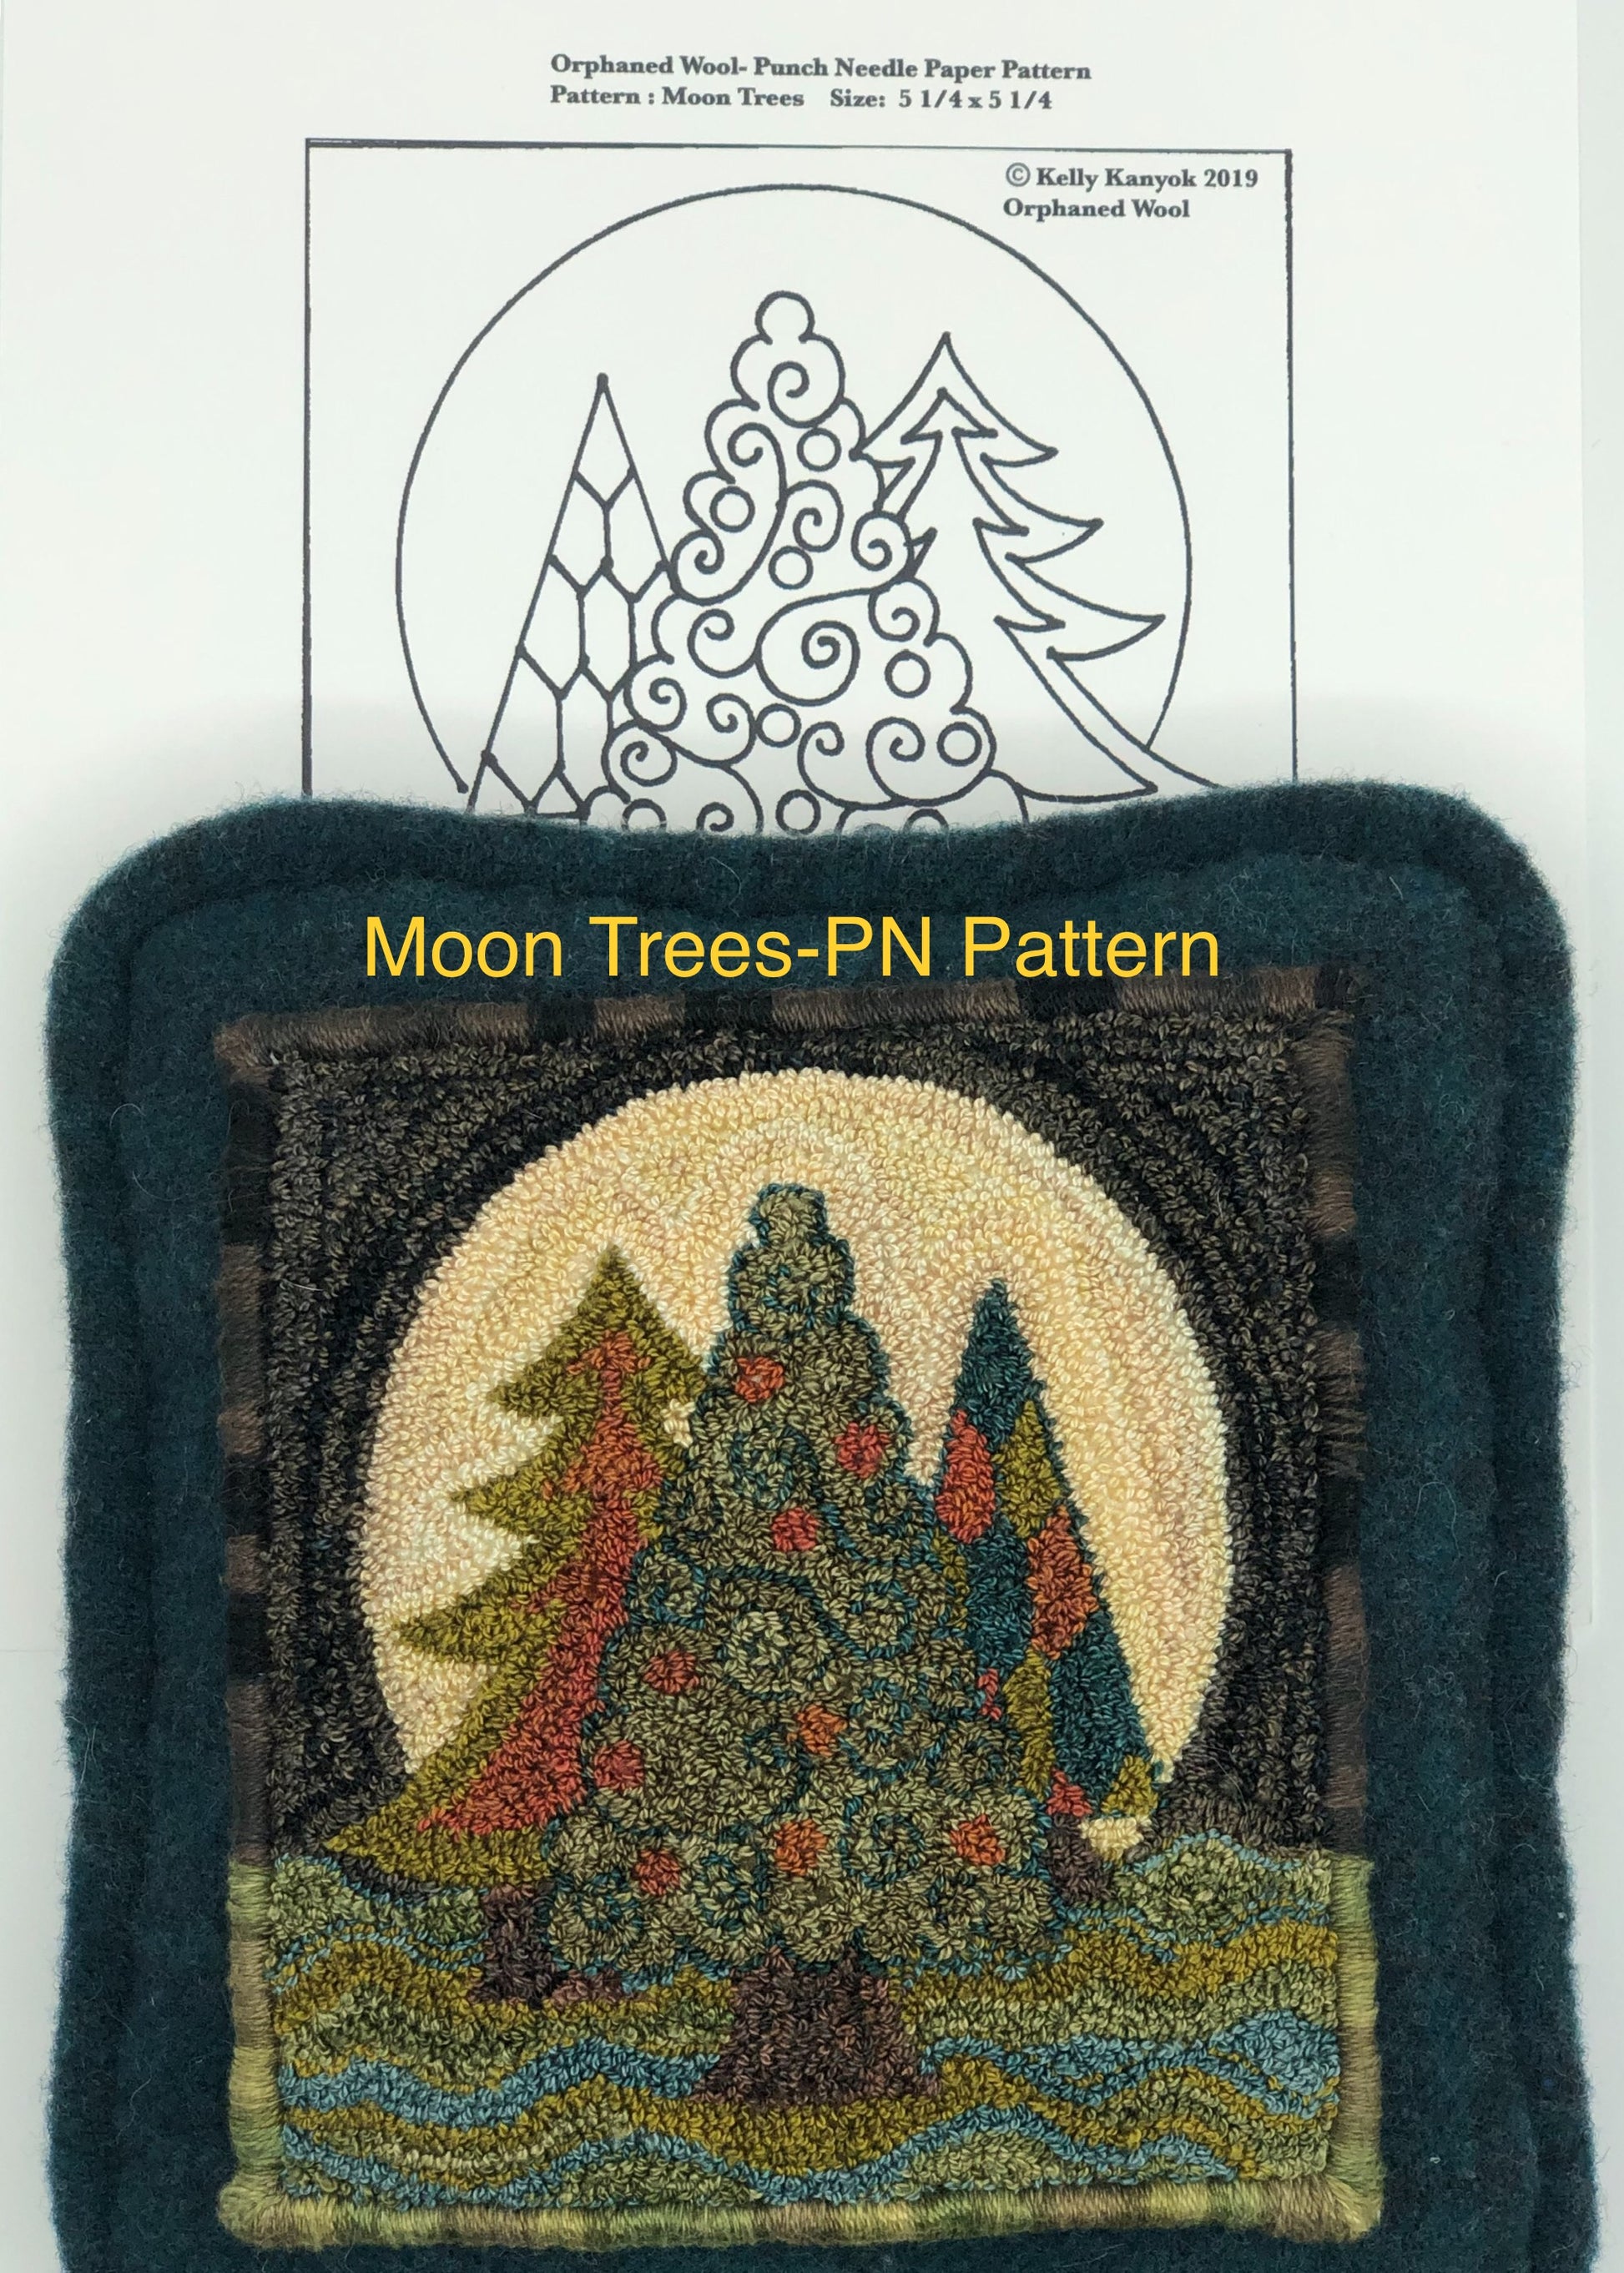 Moon Trees- Punch Needle Pattern by Orphaned Wool. This pattern is available in two different formats, paper pattern and pattern on weavers cloth fabric. Both patterns include the color codes for creating the pattern in Valdani Thread or DMC Floss or a combination of both types of threads. Makes a sweet pillow design.